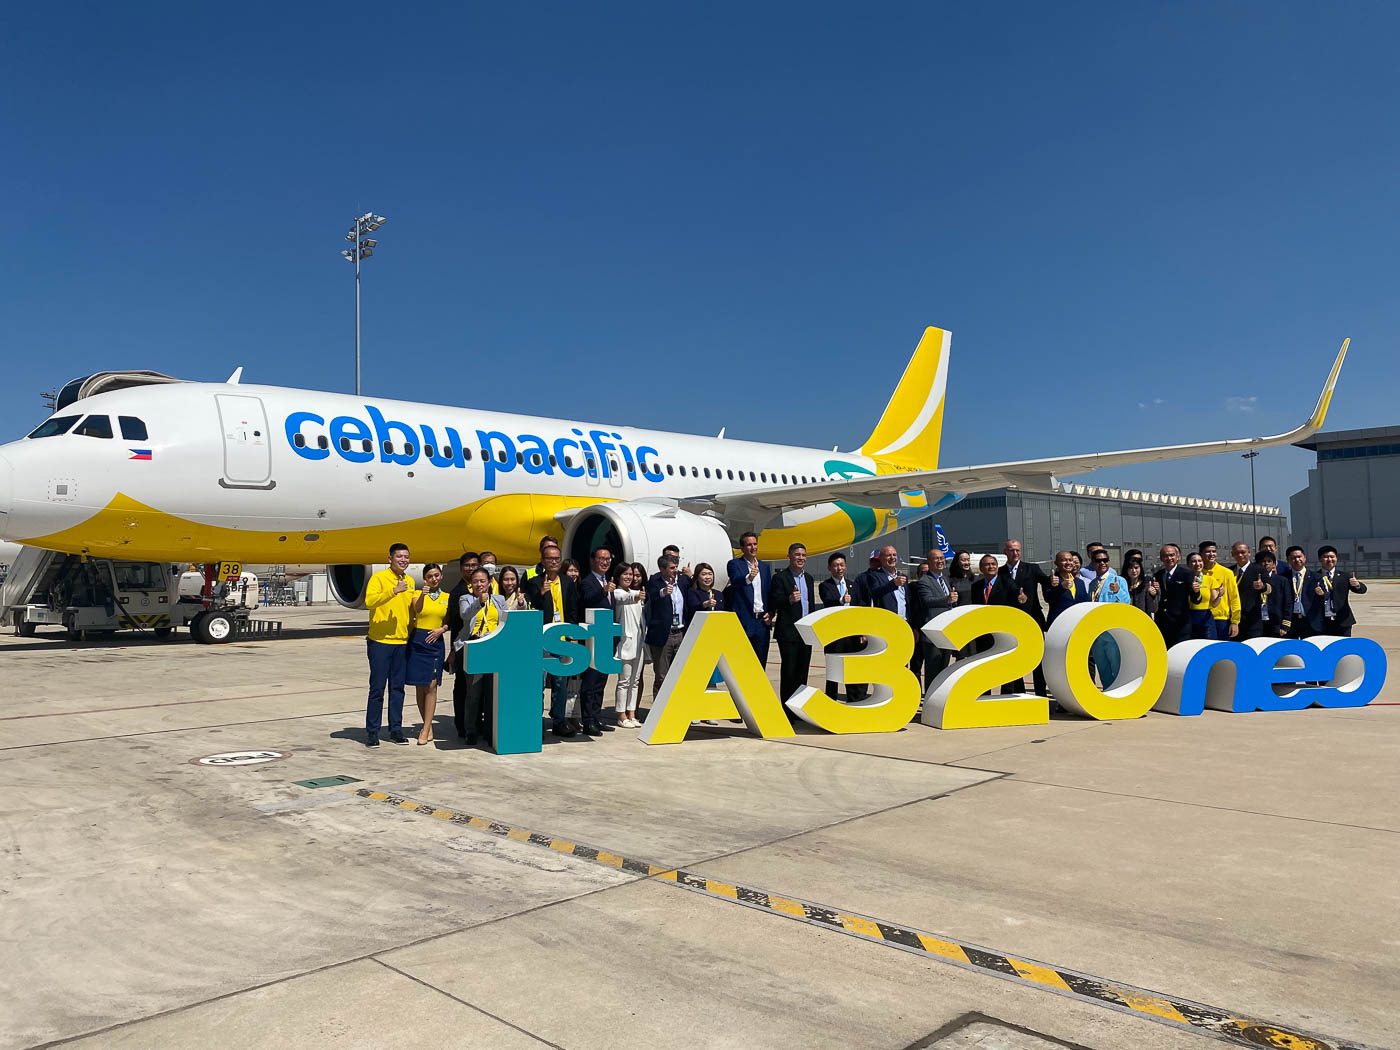 Cebu Pacific adds more planes as it struggles with disruptions